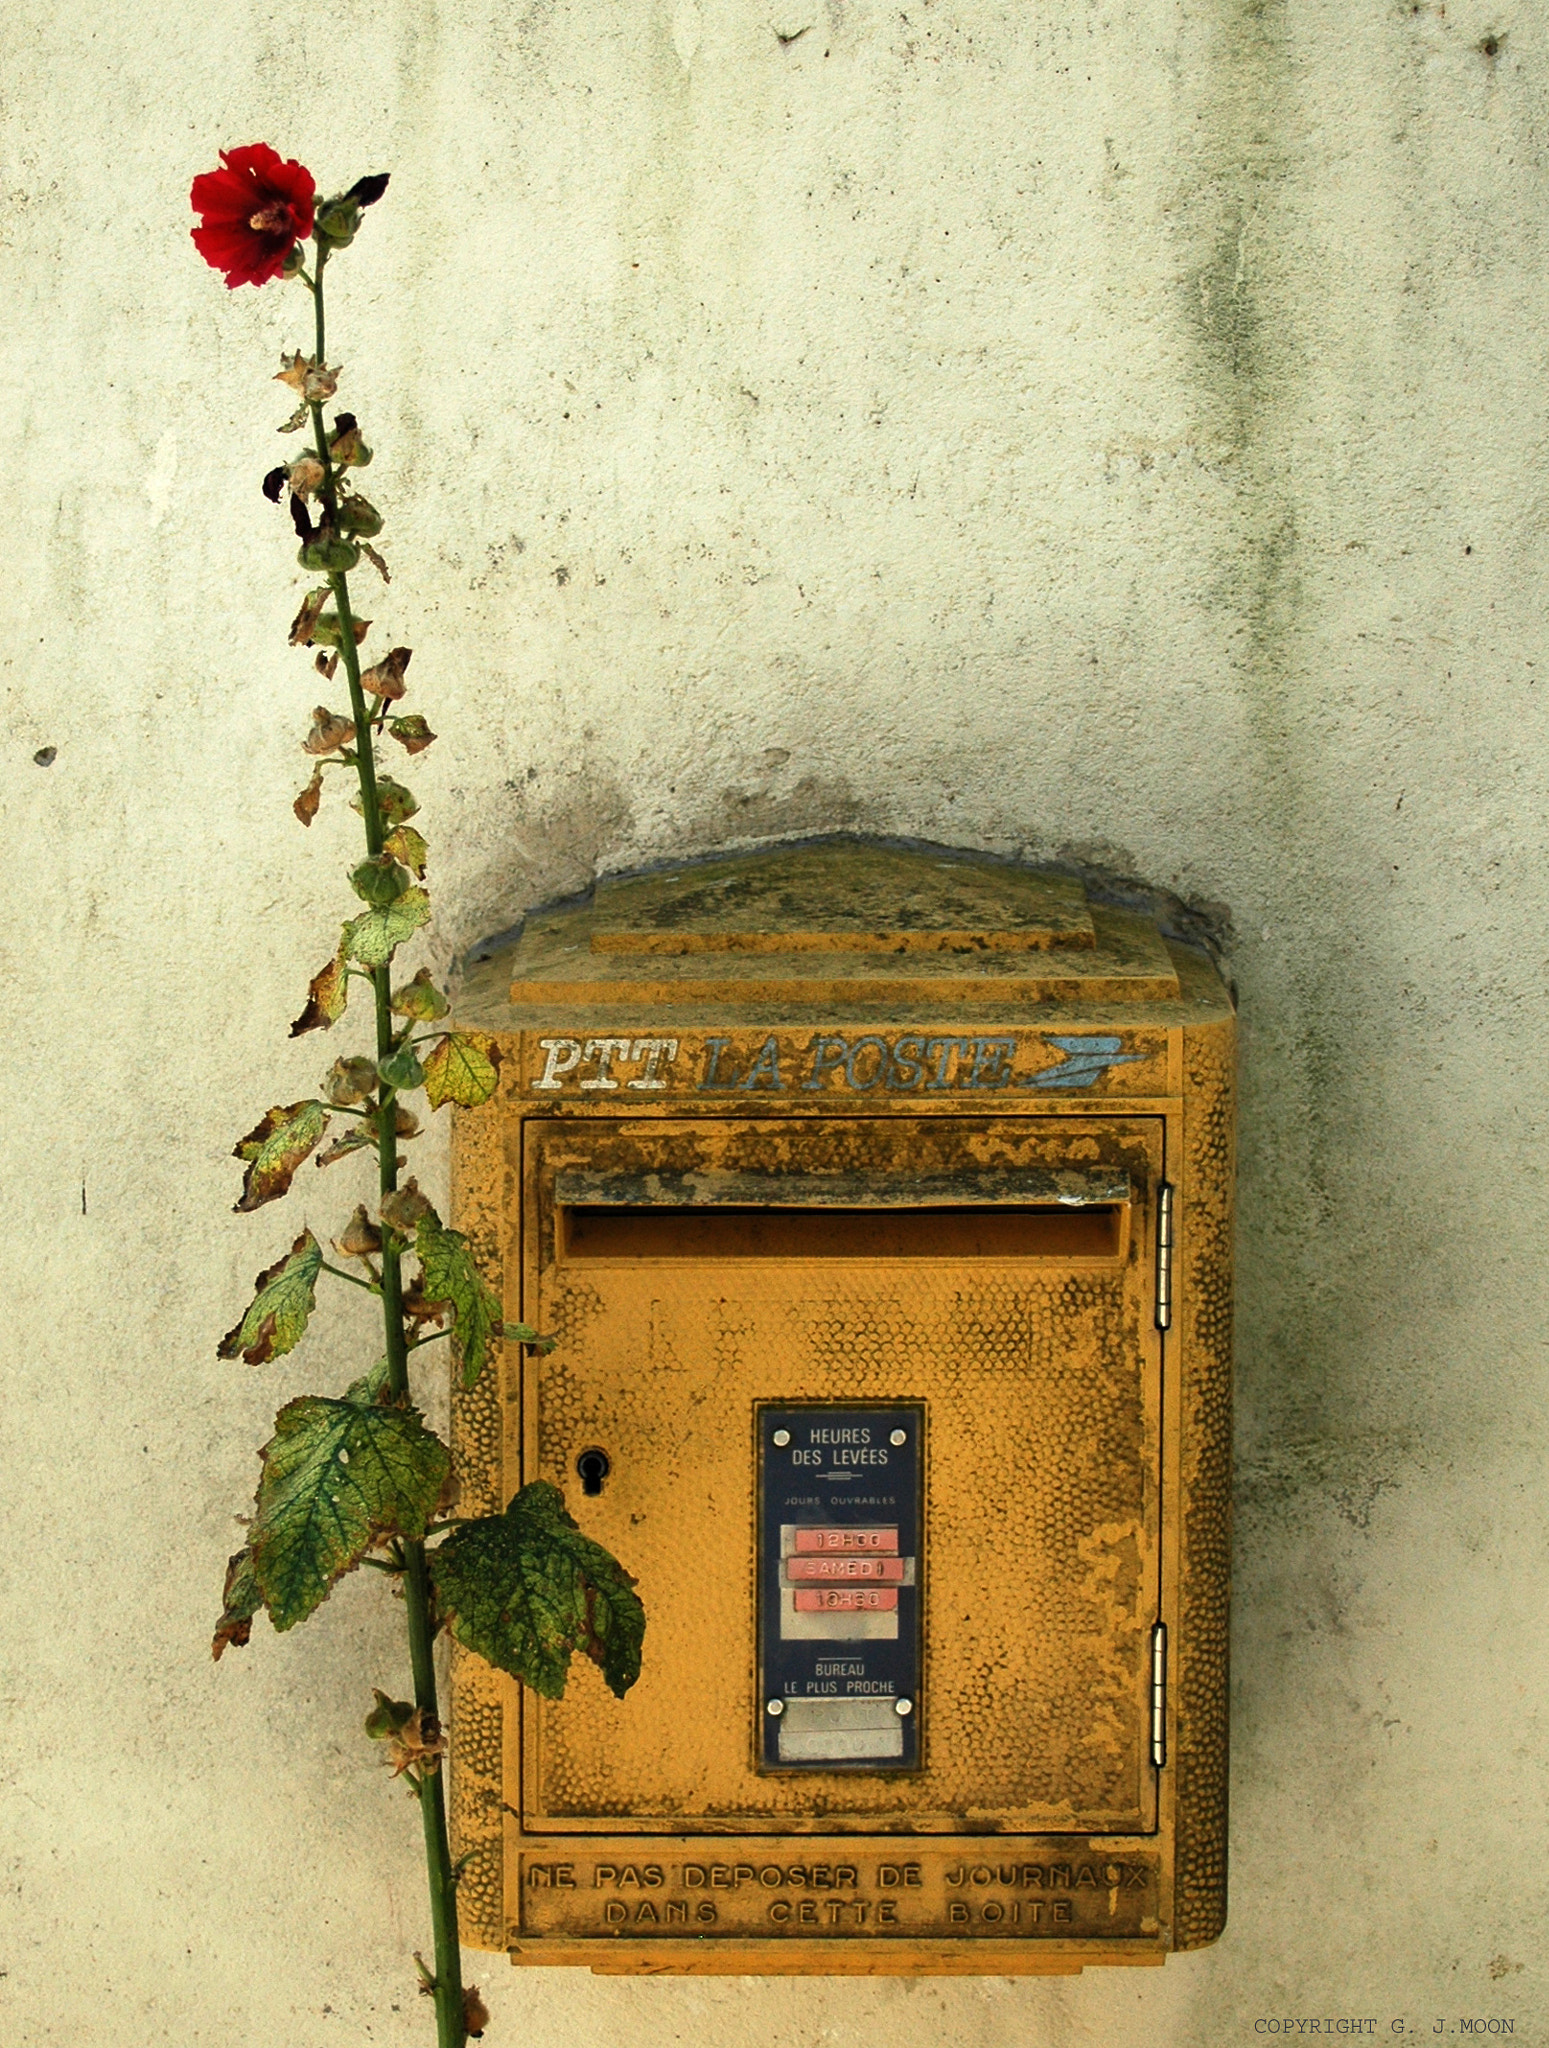 Nikon D70 sample photo. The flower and the mailbox photography